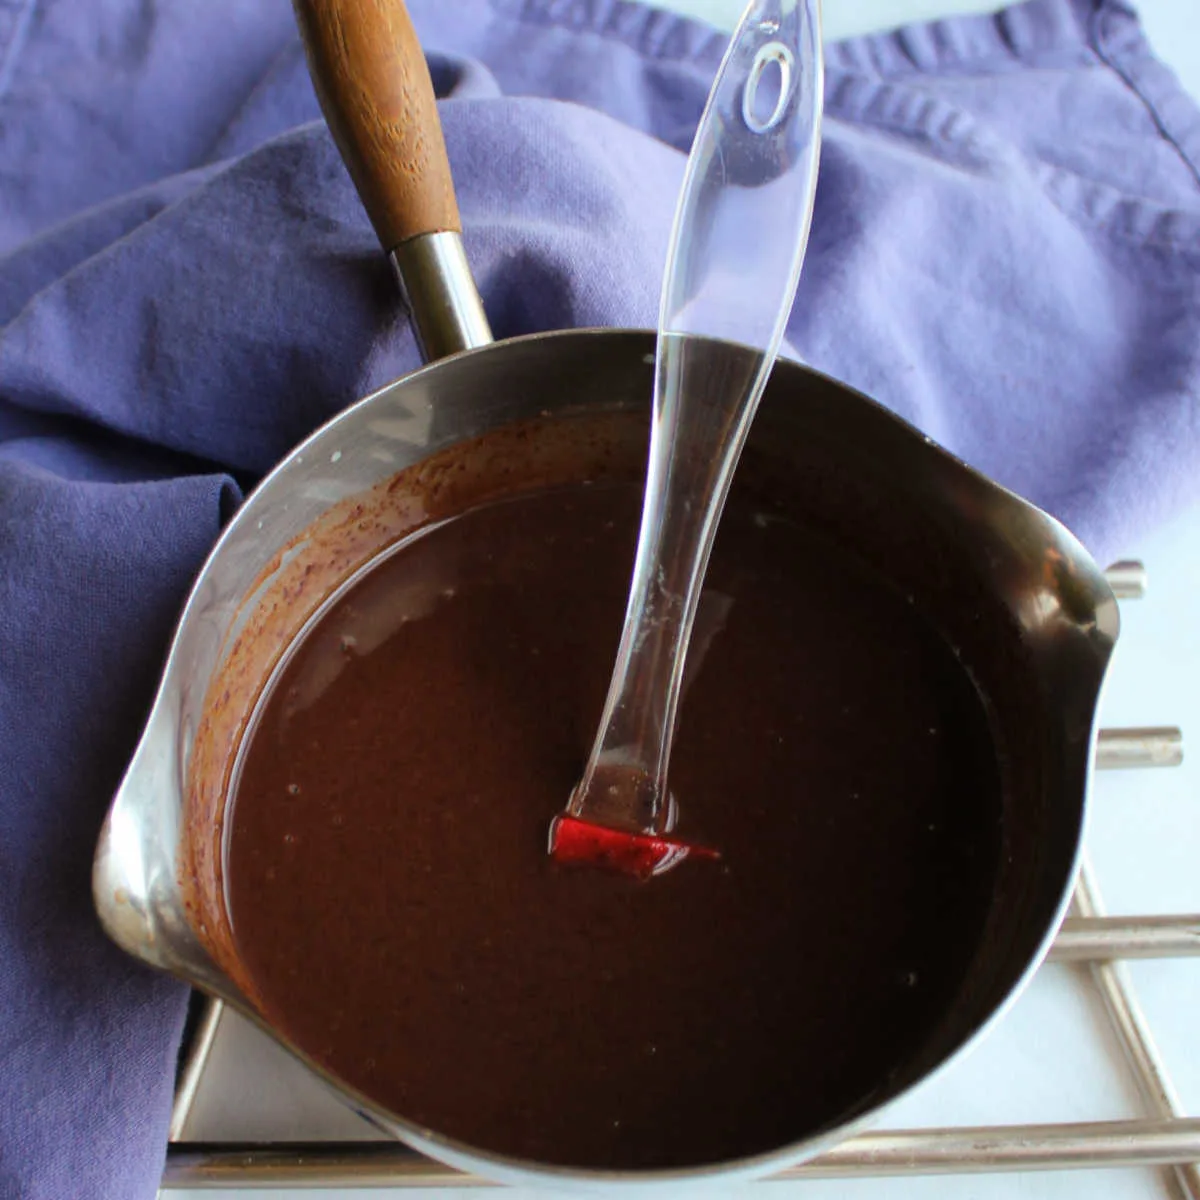 Rich chocolate glaze in saucepan, ready to use.